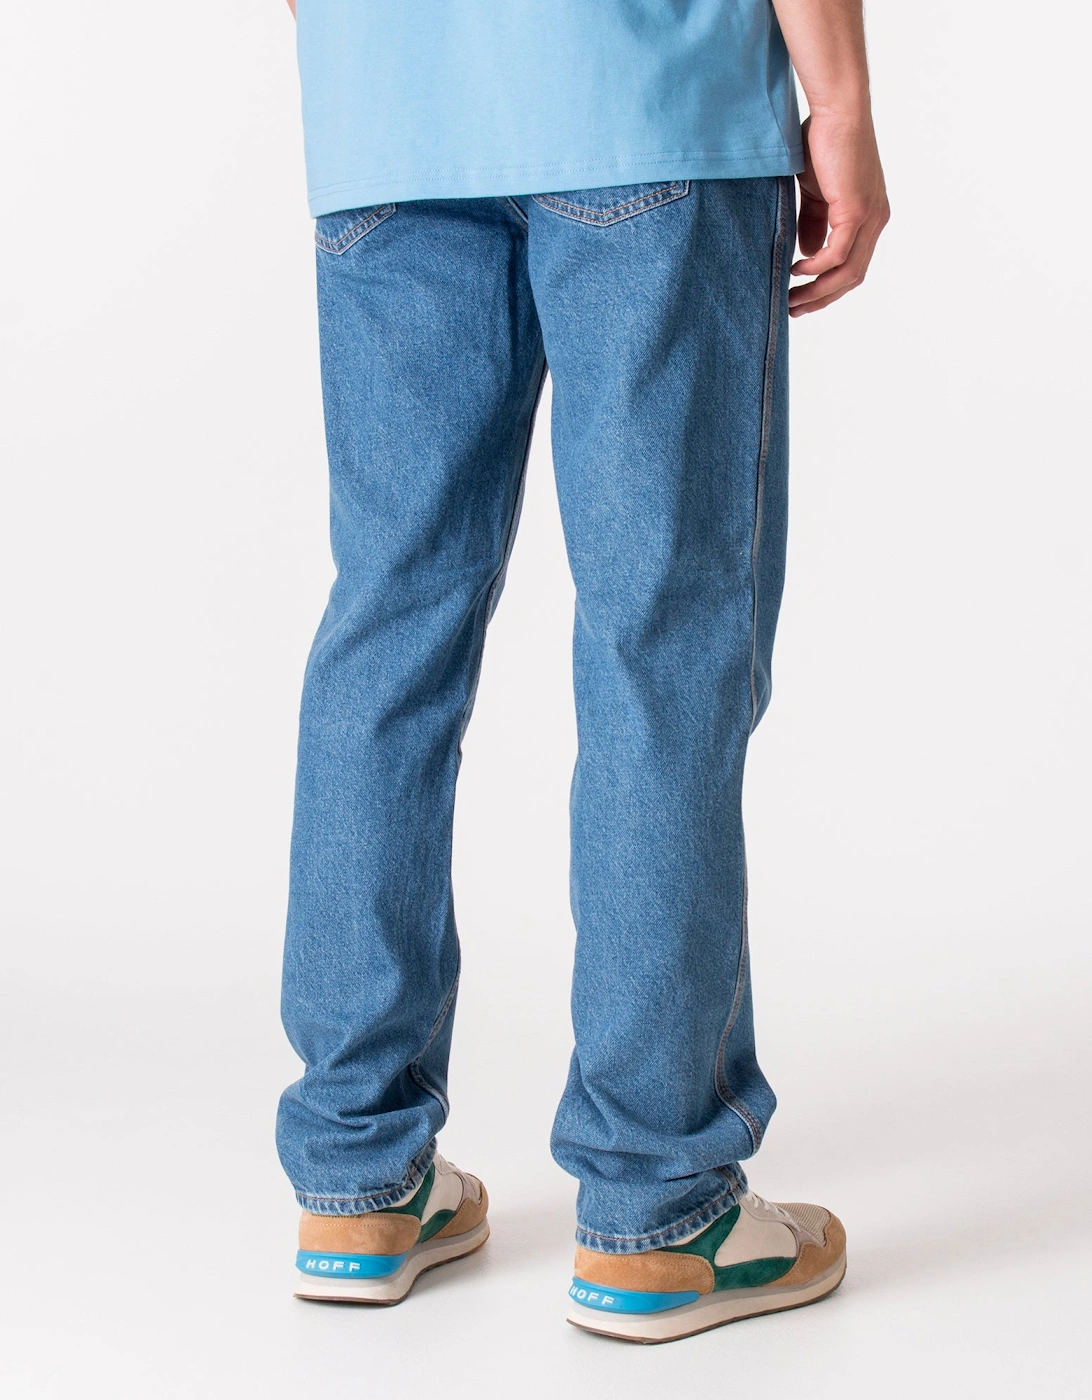 Relaxed Fit Houston Denim Jeans